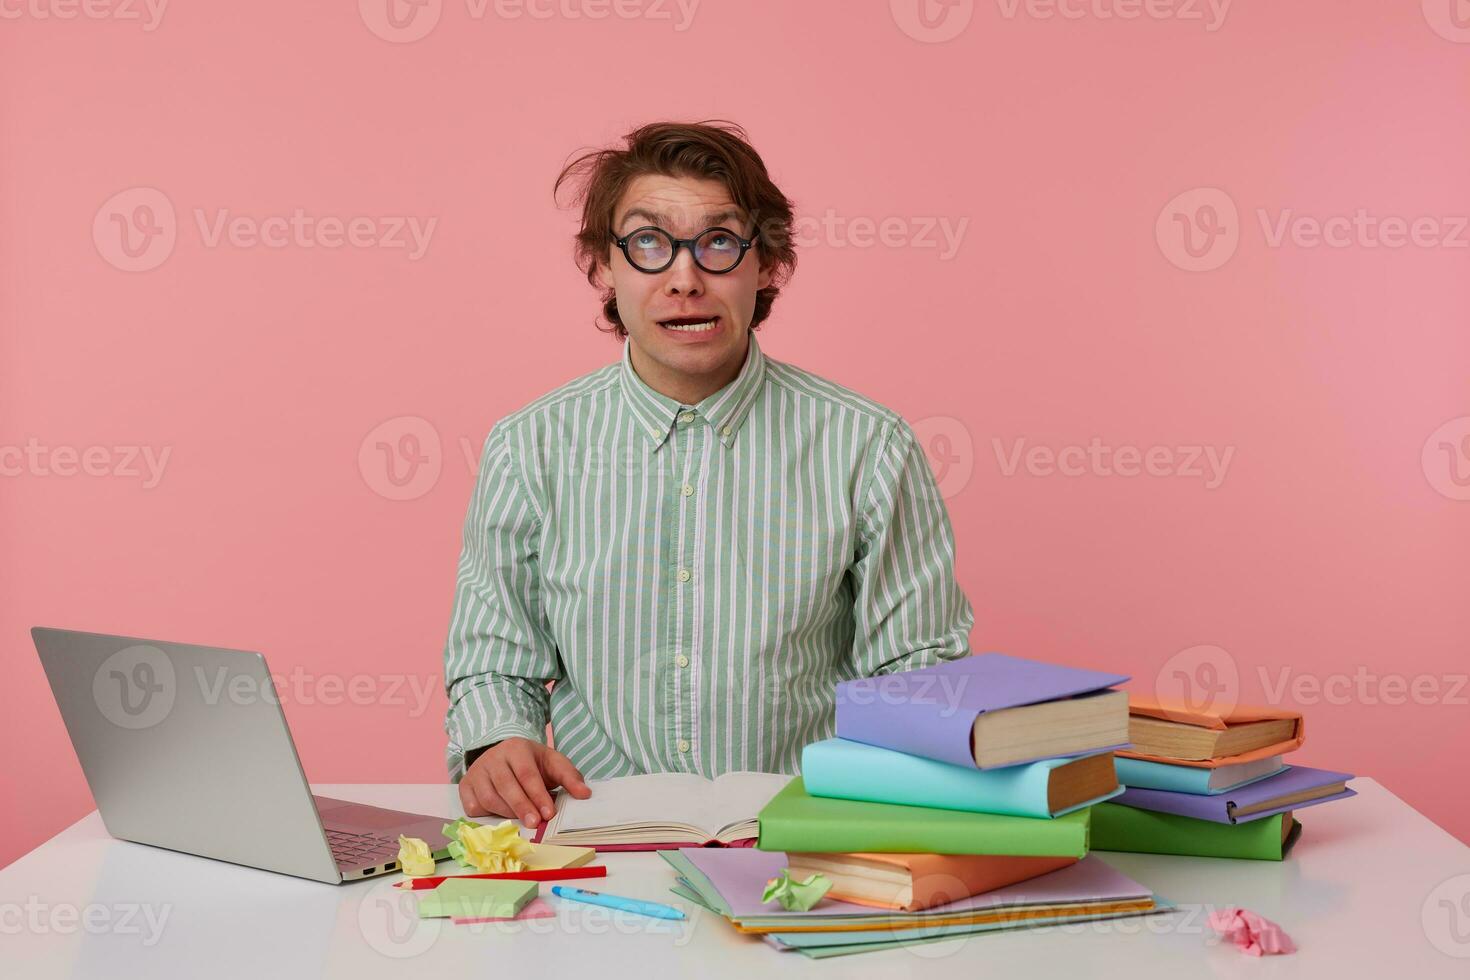 Young confused guy with glasses, wears on blank shirt, sitting at a table with books, working at a laptop, looks crazy and funny. Isolated over pink background. photo